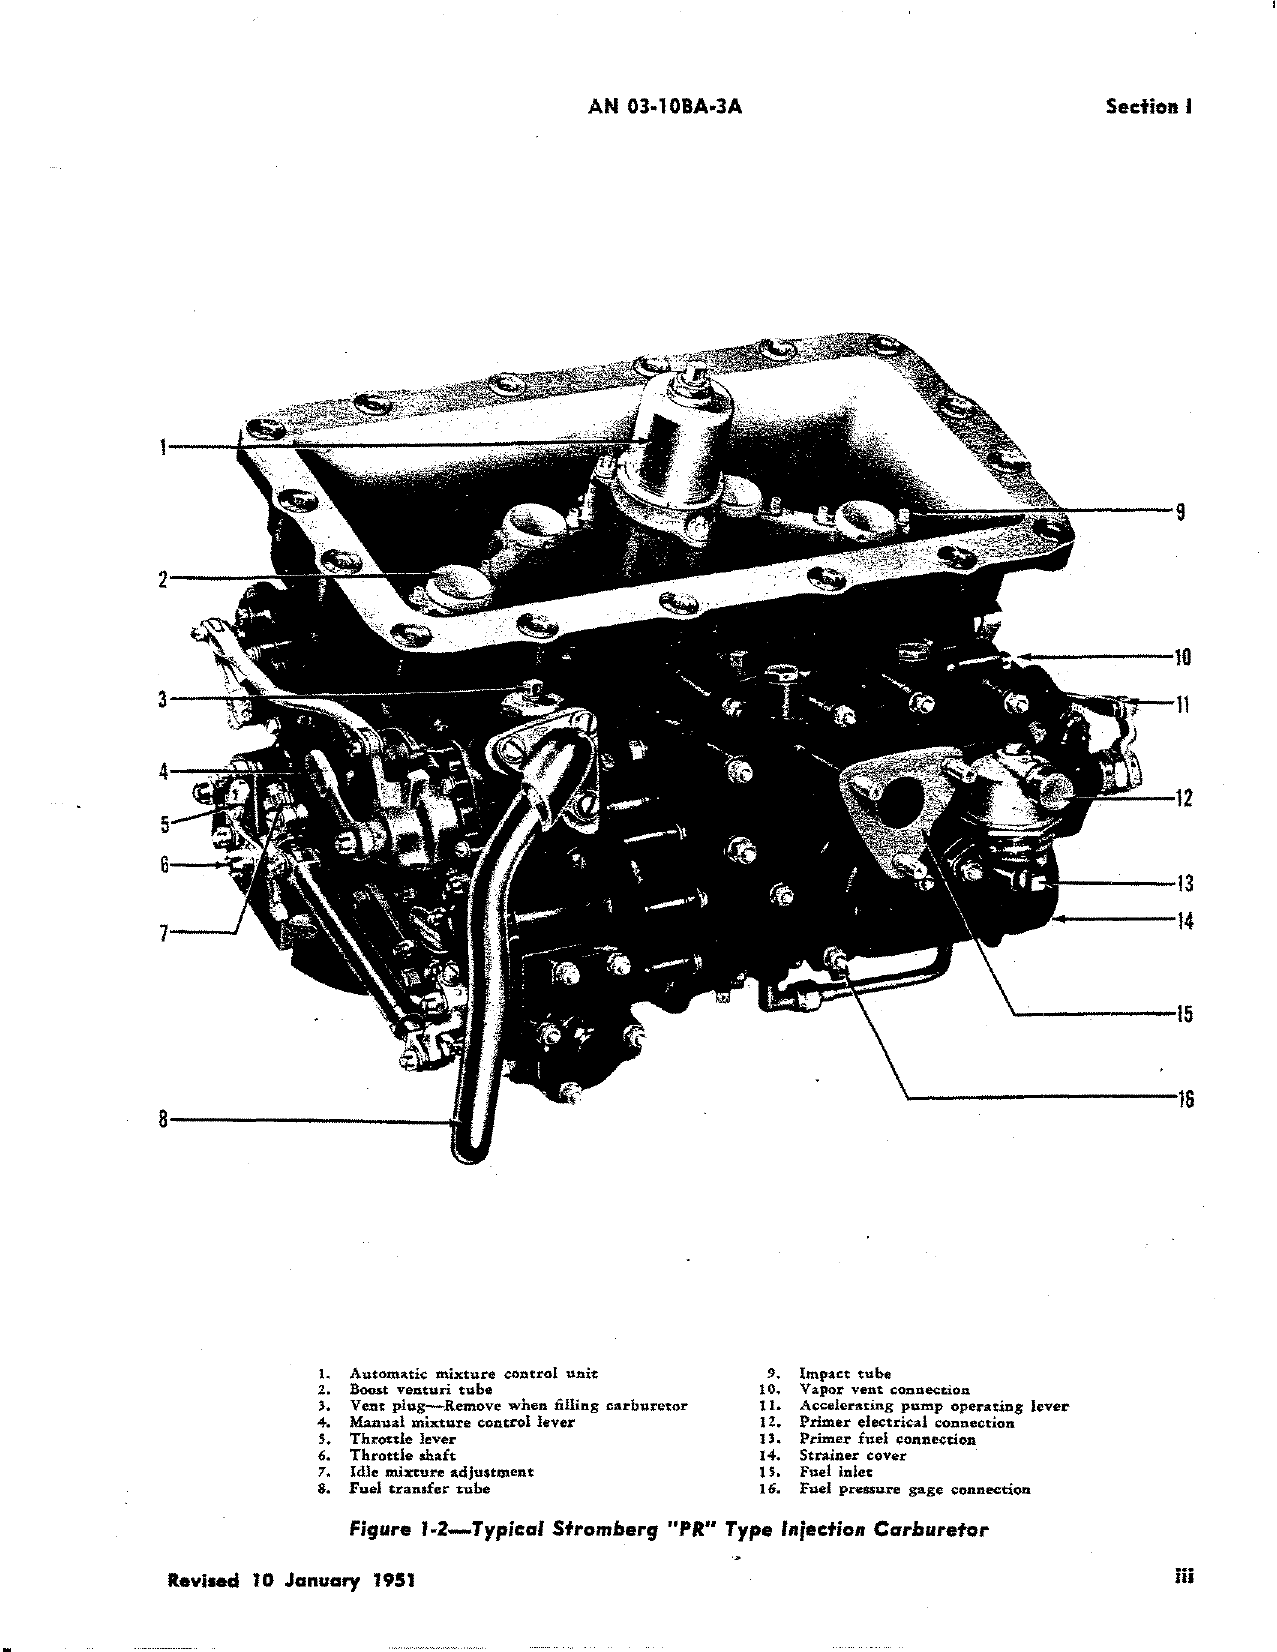 Sample page 5 from AirCorps Library document: Handbook Overhaul Instructions for Injection Carburetors